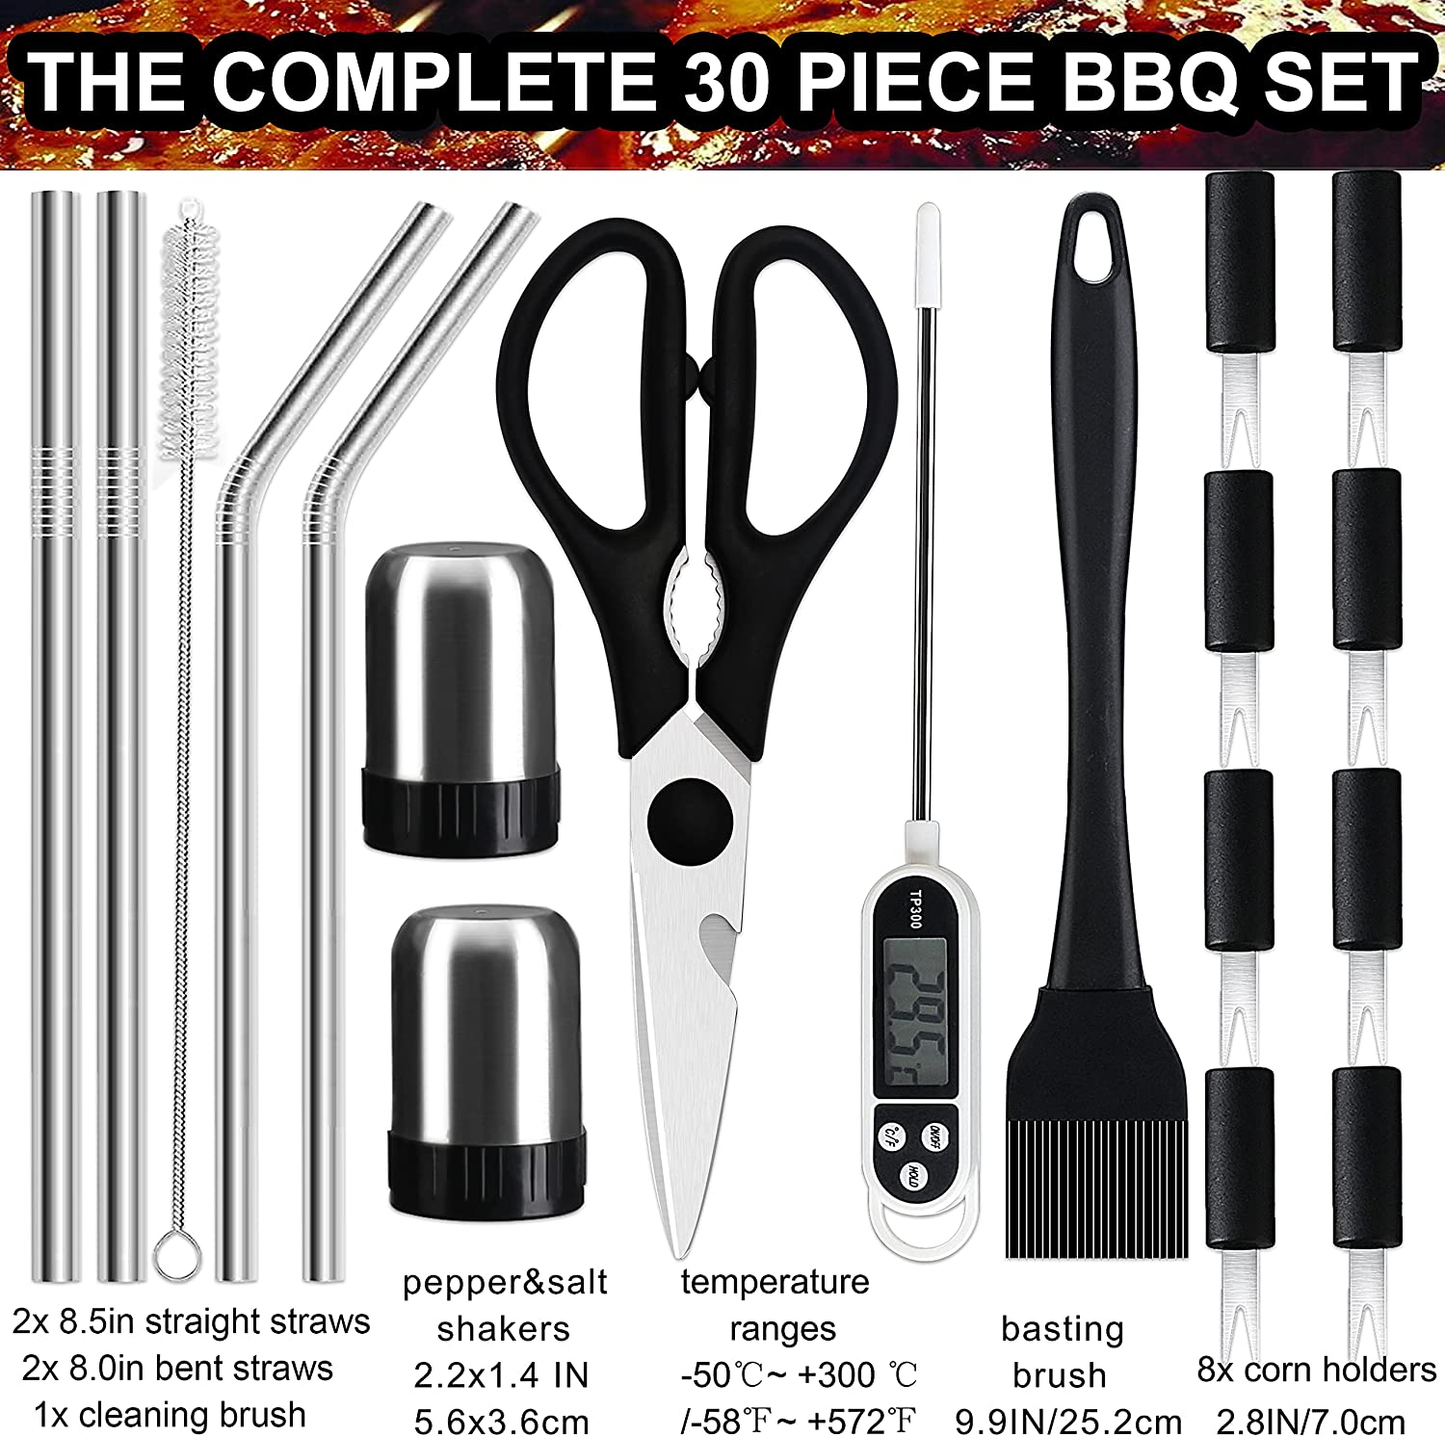 31PC Heavy Duty BBQ Grilling Accessories Grill Tools Set - Stainless Steel Grilling Kit with Storage Bag for Camping, Tailgating - Perfect Barbecue Utensil Gift for Men Women